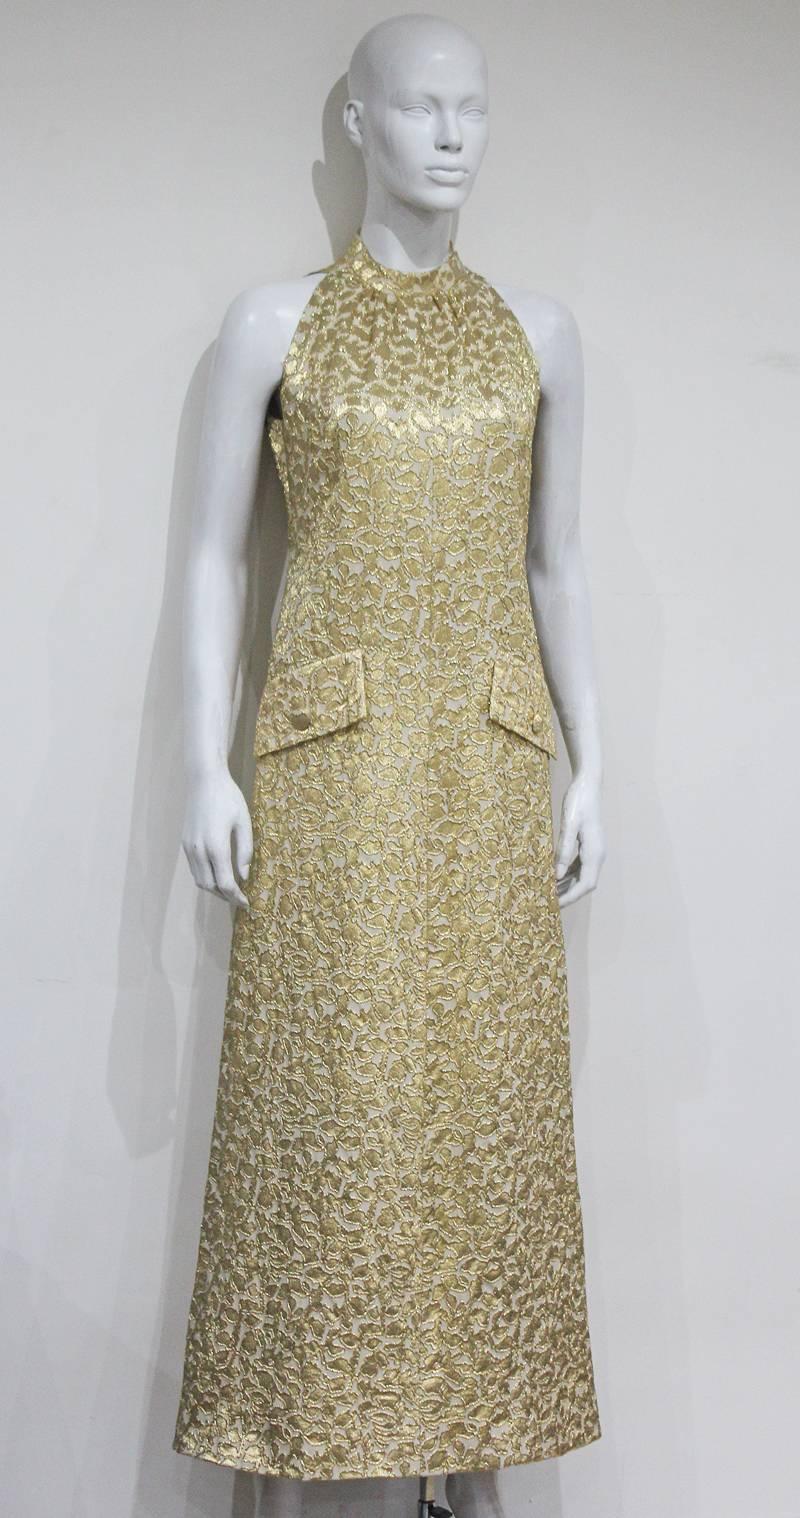 An exquisite 1968 evening dress by the legendary French fashion house Jean Patou. The dress is a classic late 60s a-line finishing just above the ankles, it features two front imitation pockets for decorative purpose, ivory silk lining, a side metal